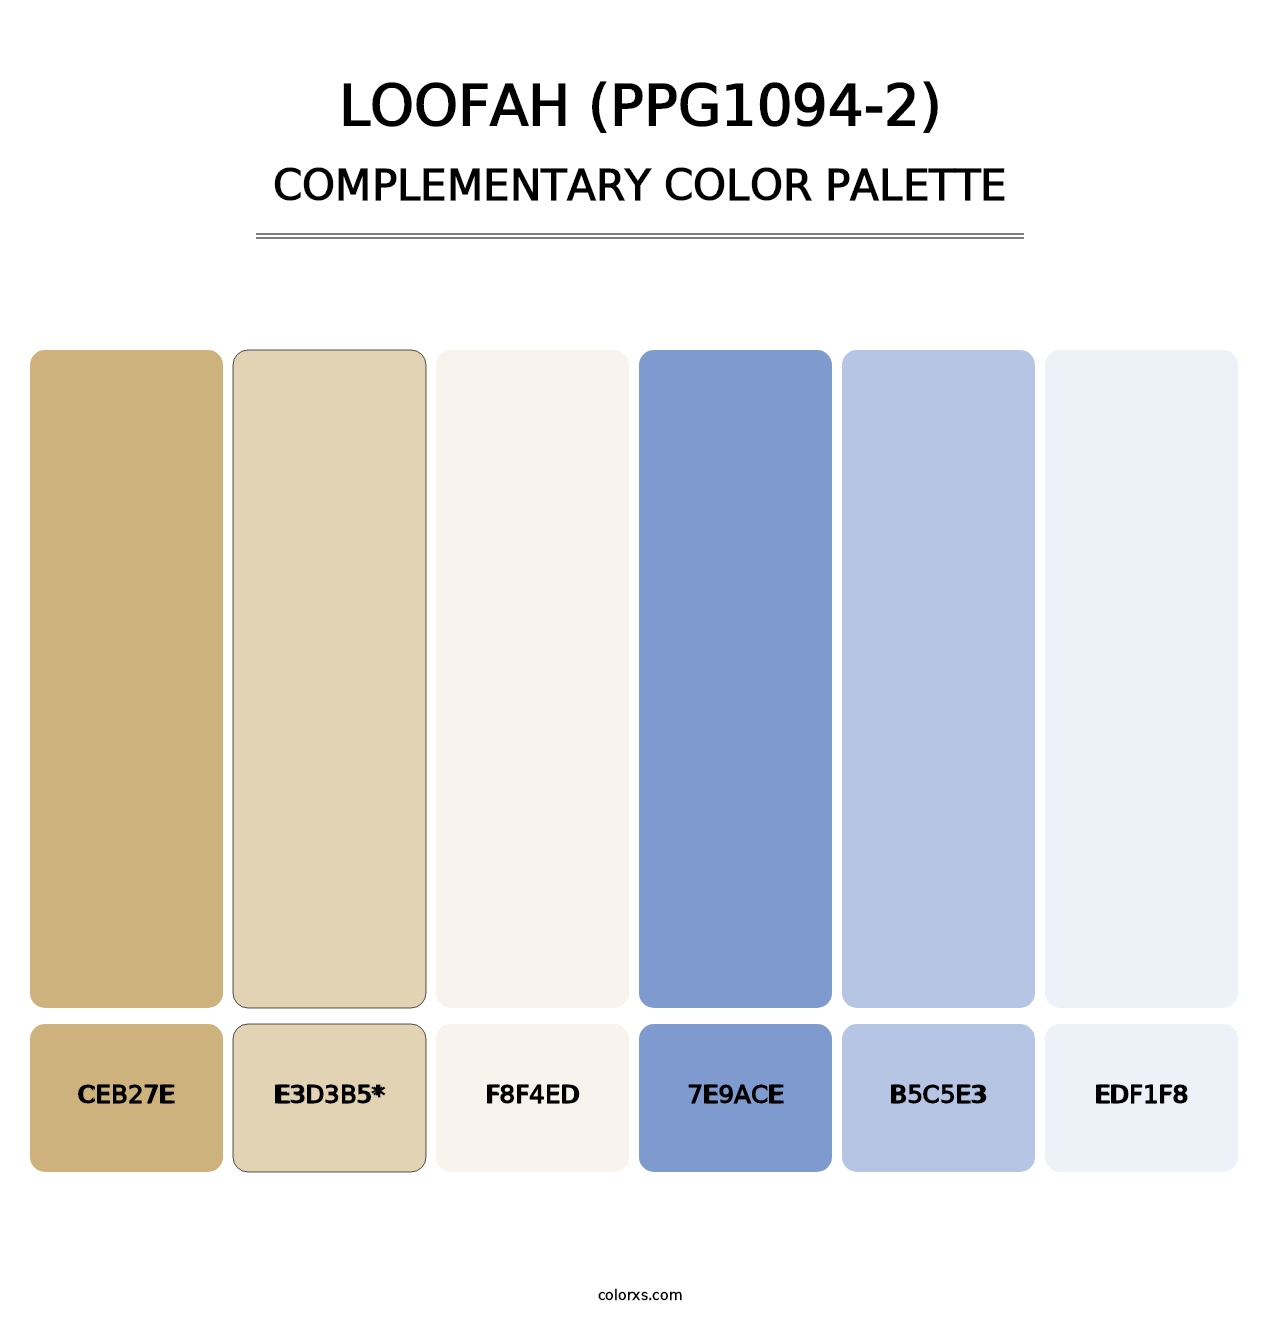 Loofah (PPG1094-2) - Complementary Color Palette